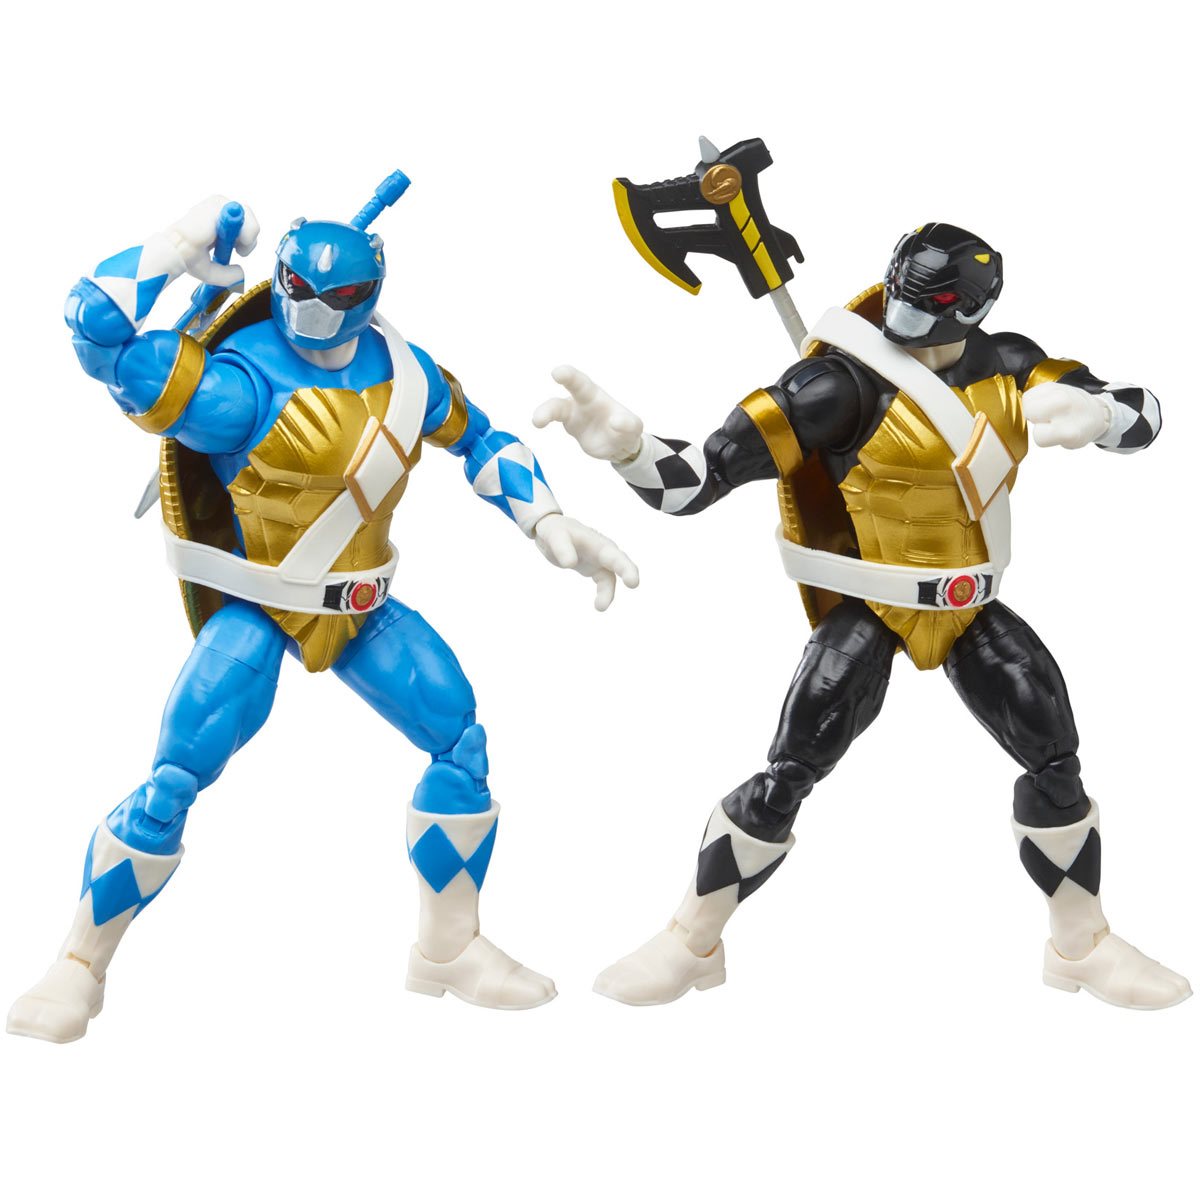 These are the new Power Rangers X T.M.N.T. action figures